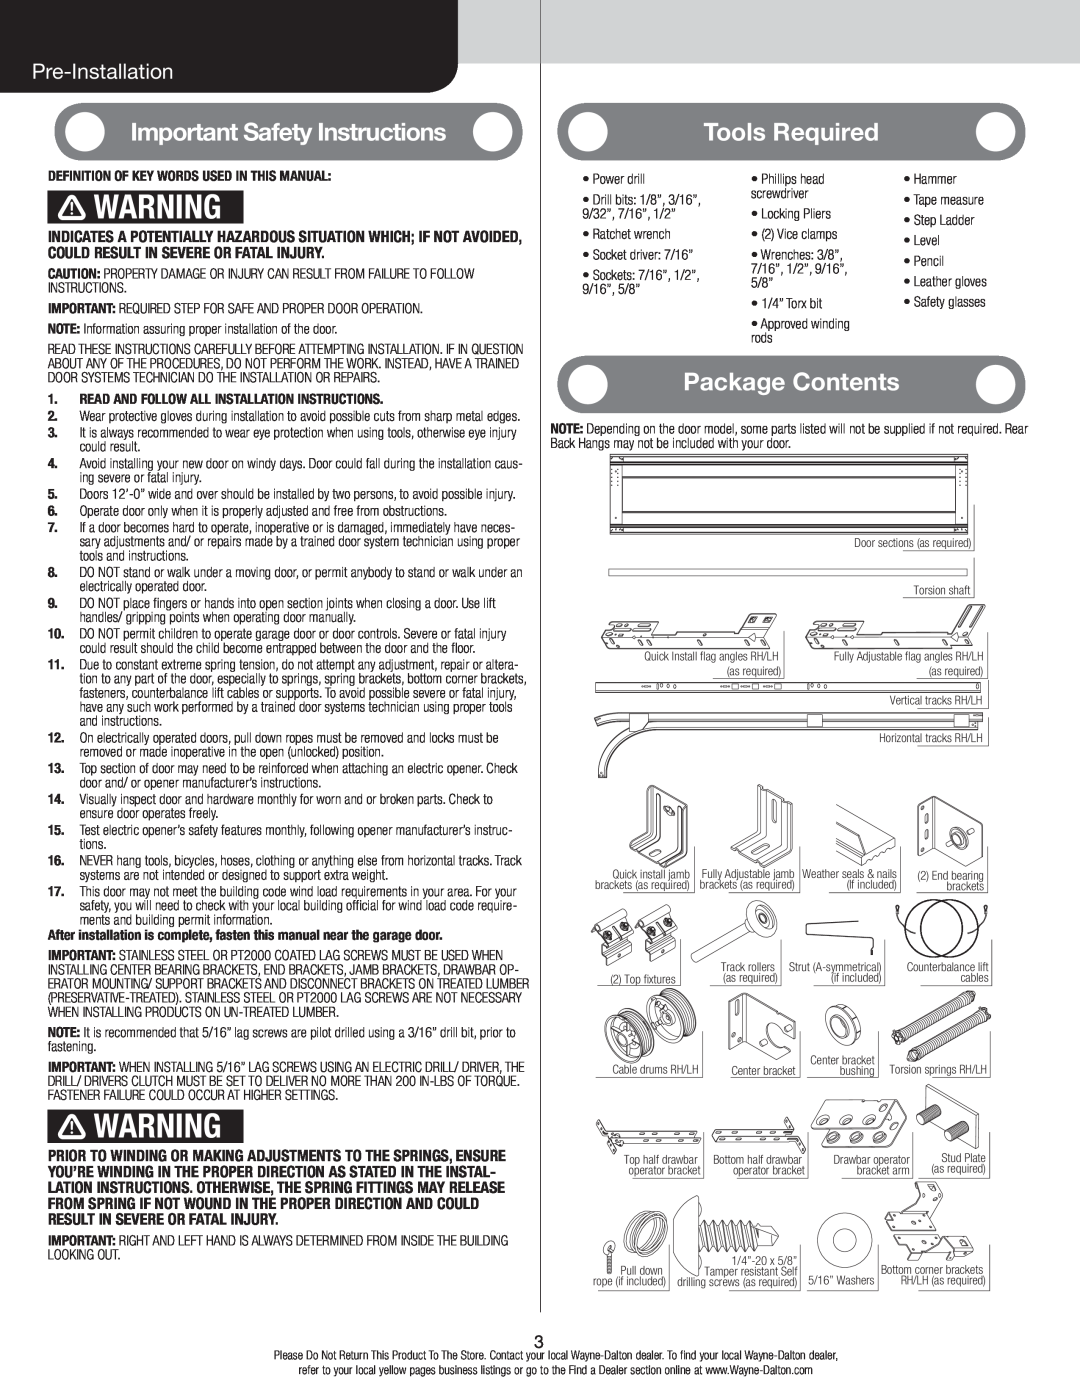 Wayne-Dalton 346919 Important Safety Instructions, Tools Required, Package Contents, Pre-Installation 